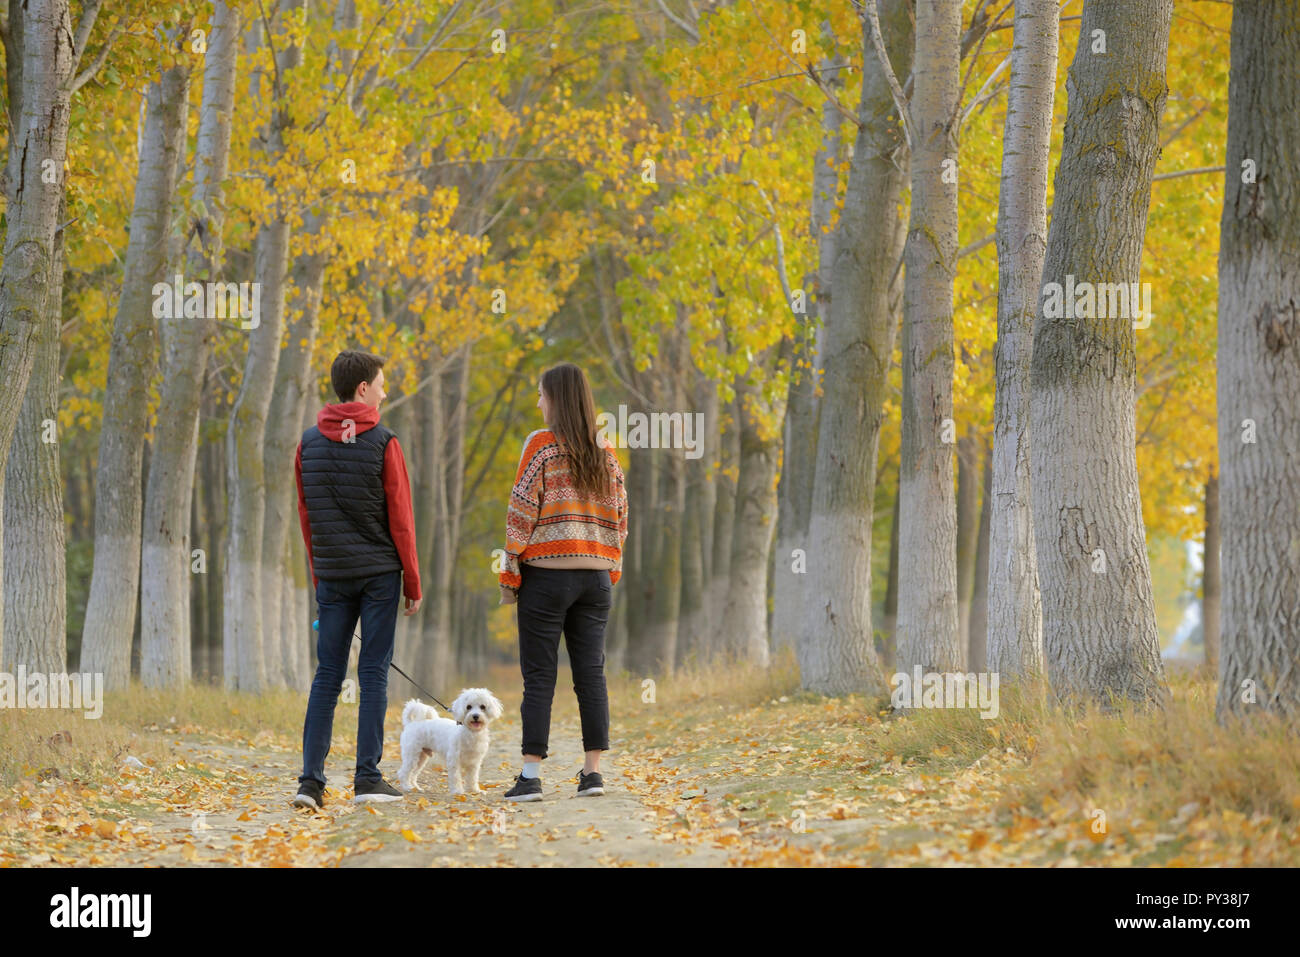 Young boy and girl with maltese dog in autumn forest Stock Photo